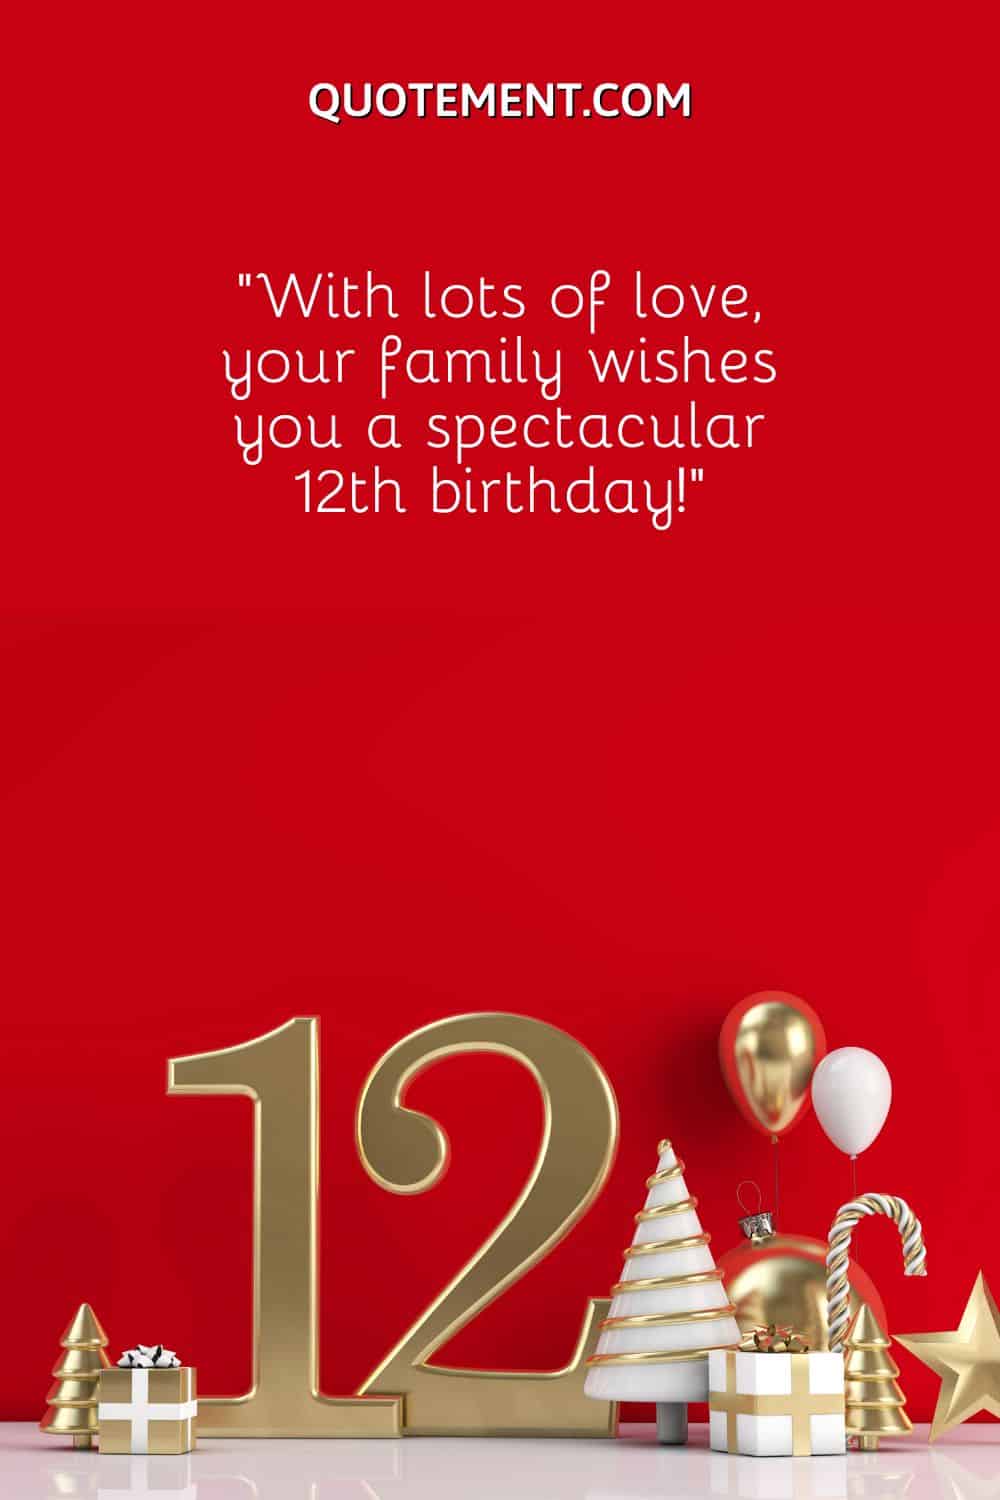 “With lots of love, your family wishes you a spectacular 12th birthday!”.